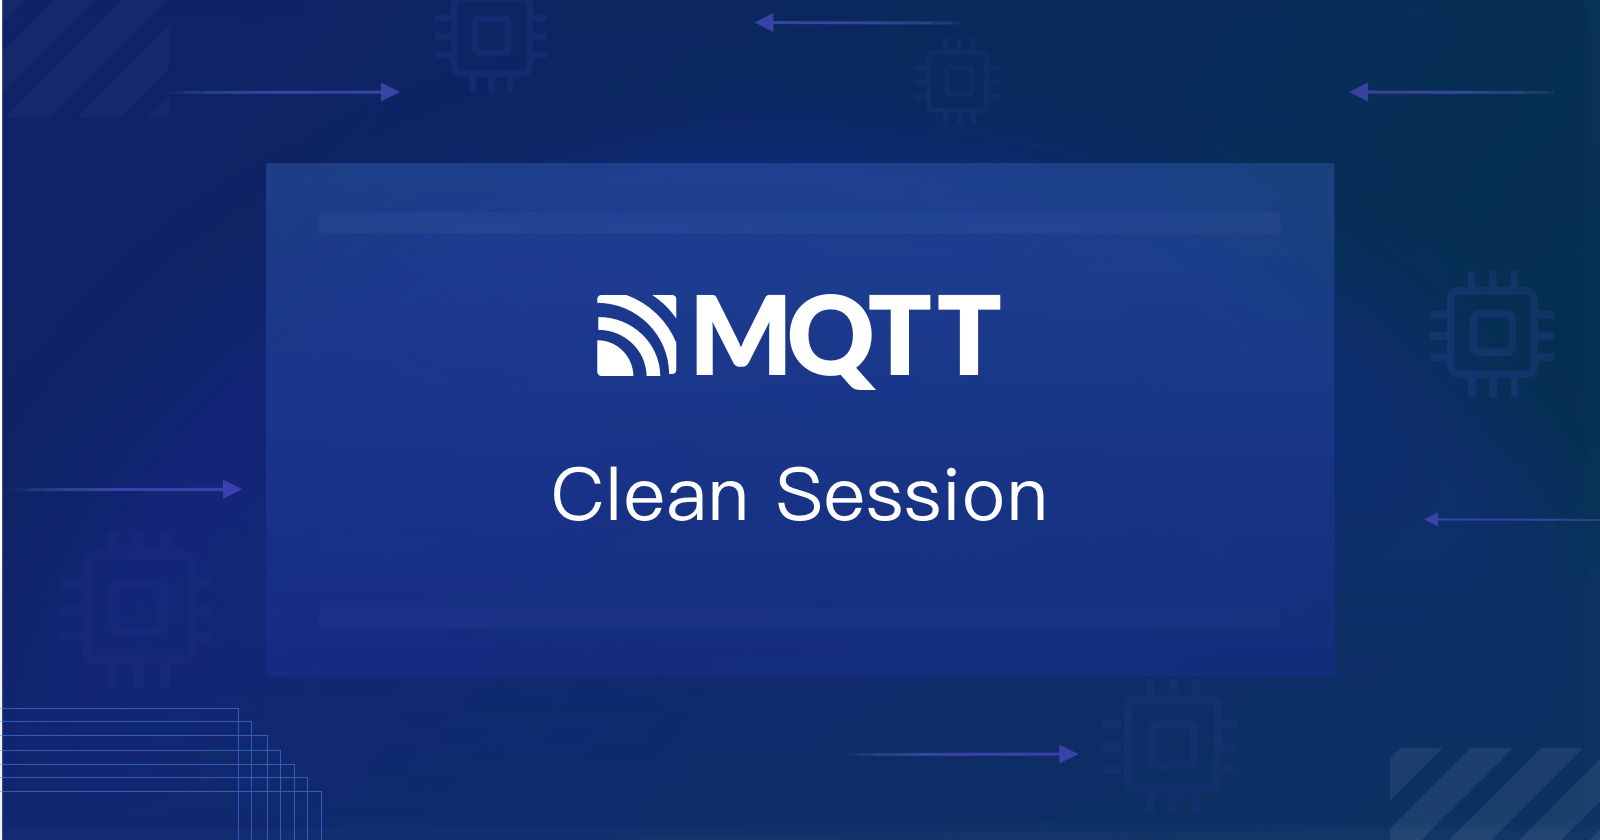 MQTT Persistent Session and Clean Session Explained